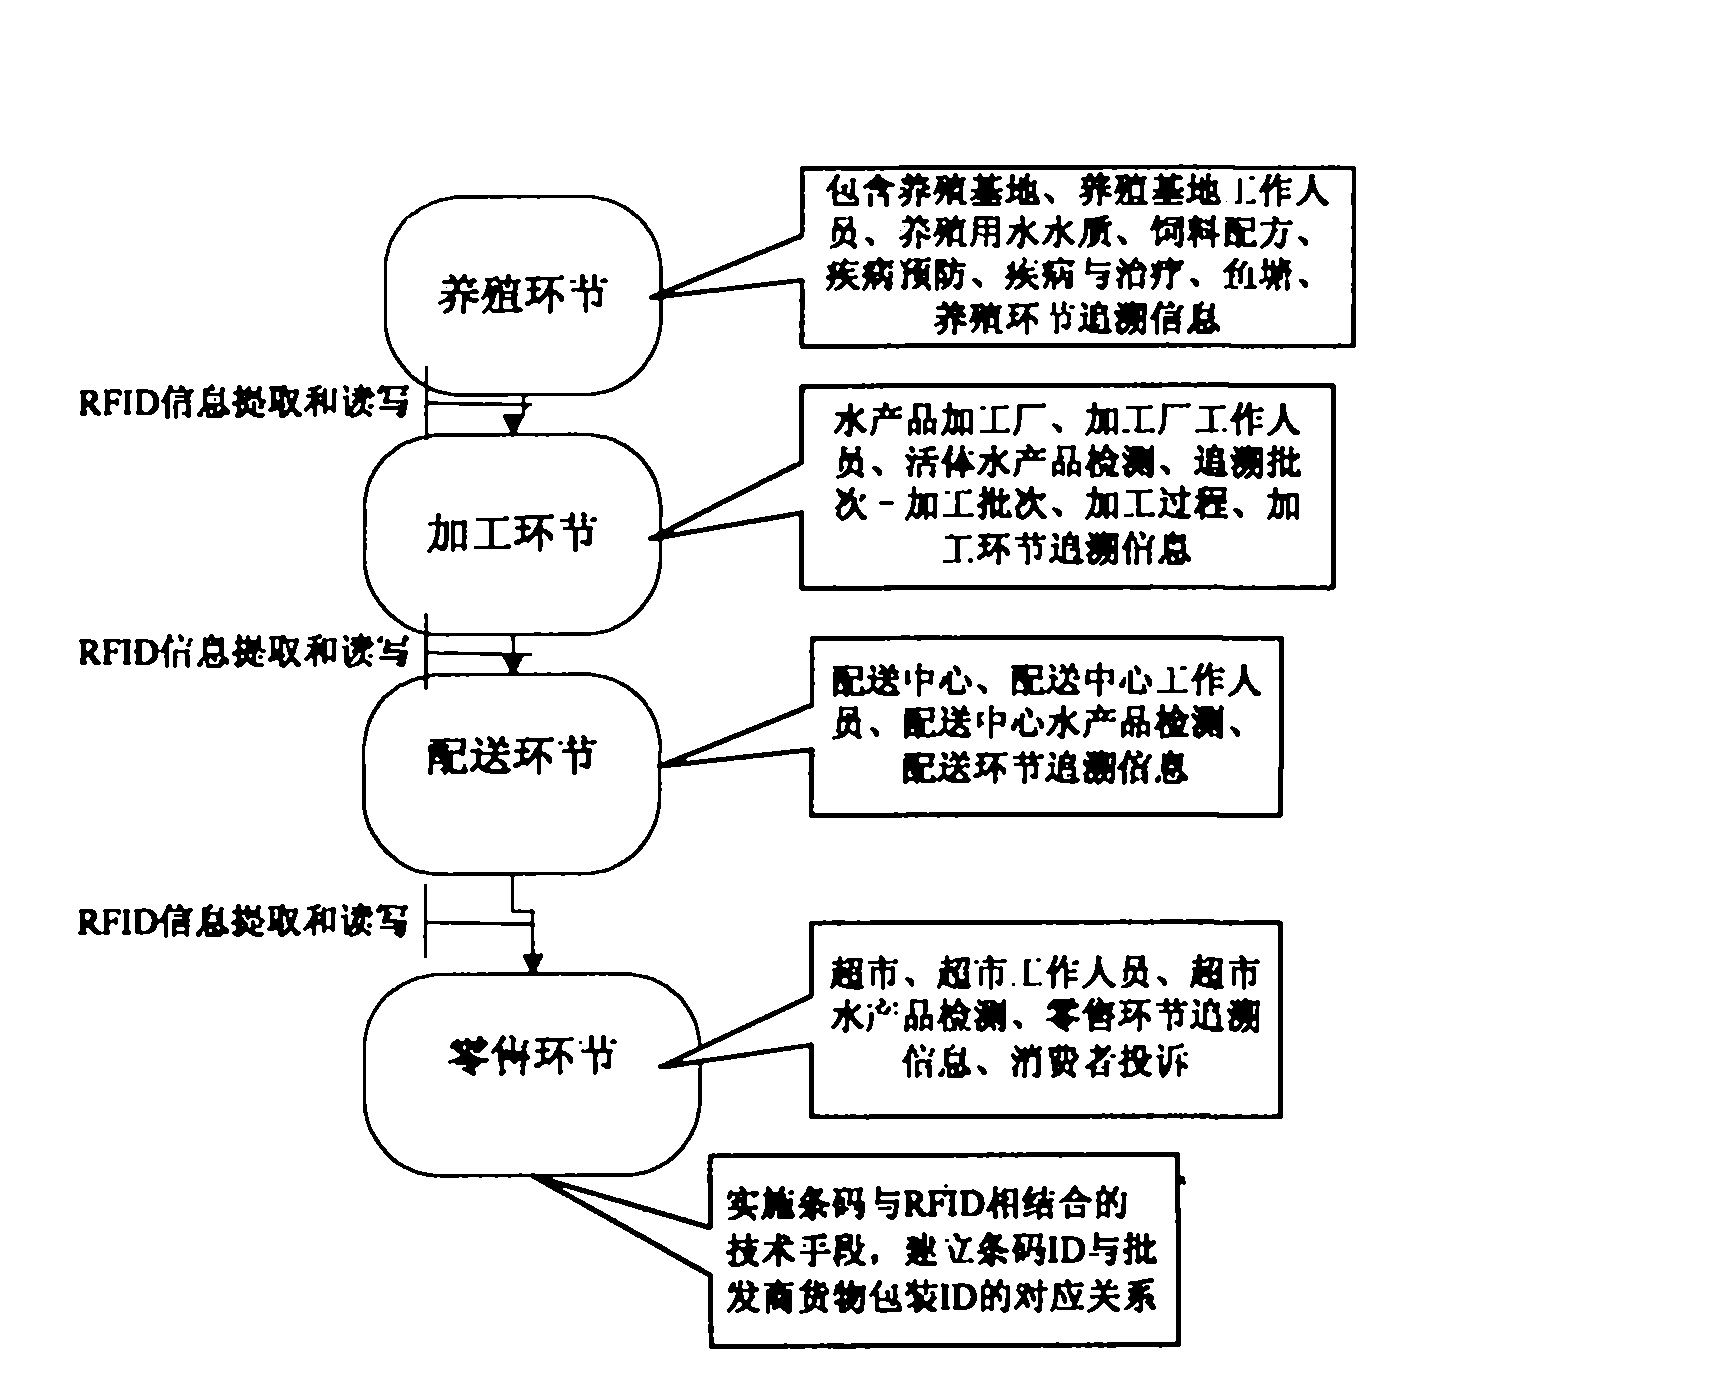 Aquatic product supply chain traceability system based on RFID and bar code technology and method thereof